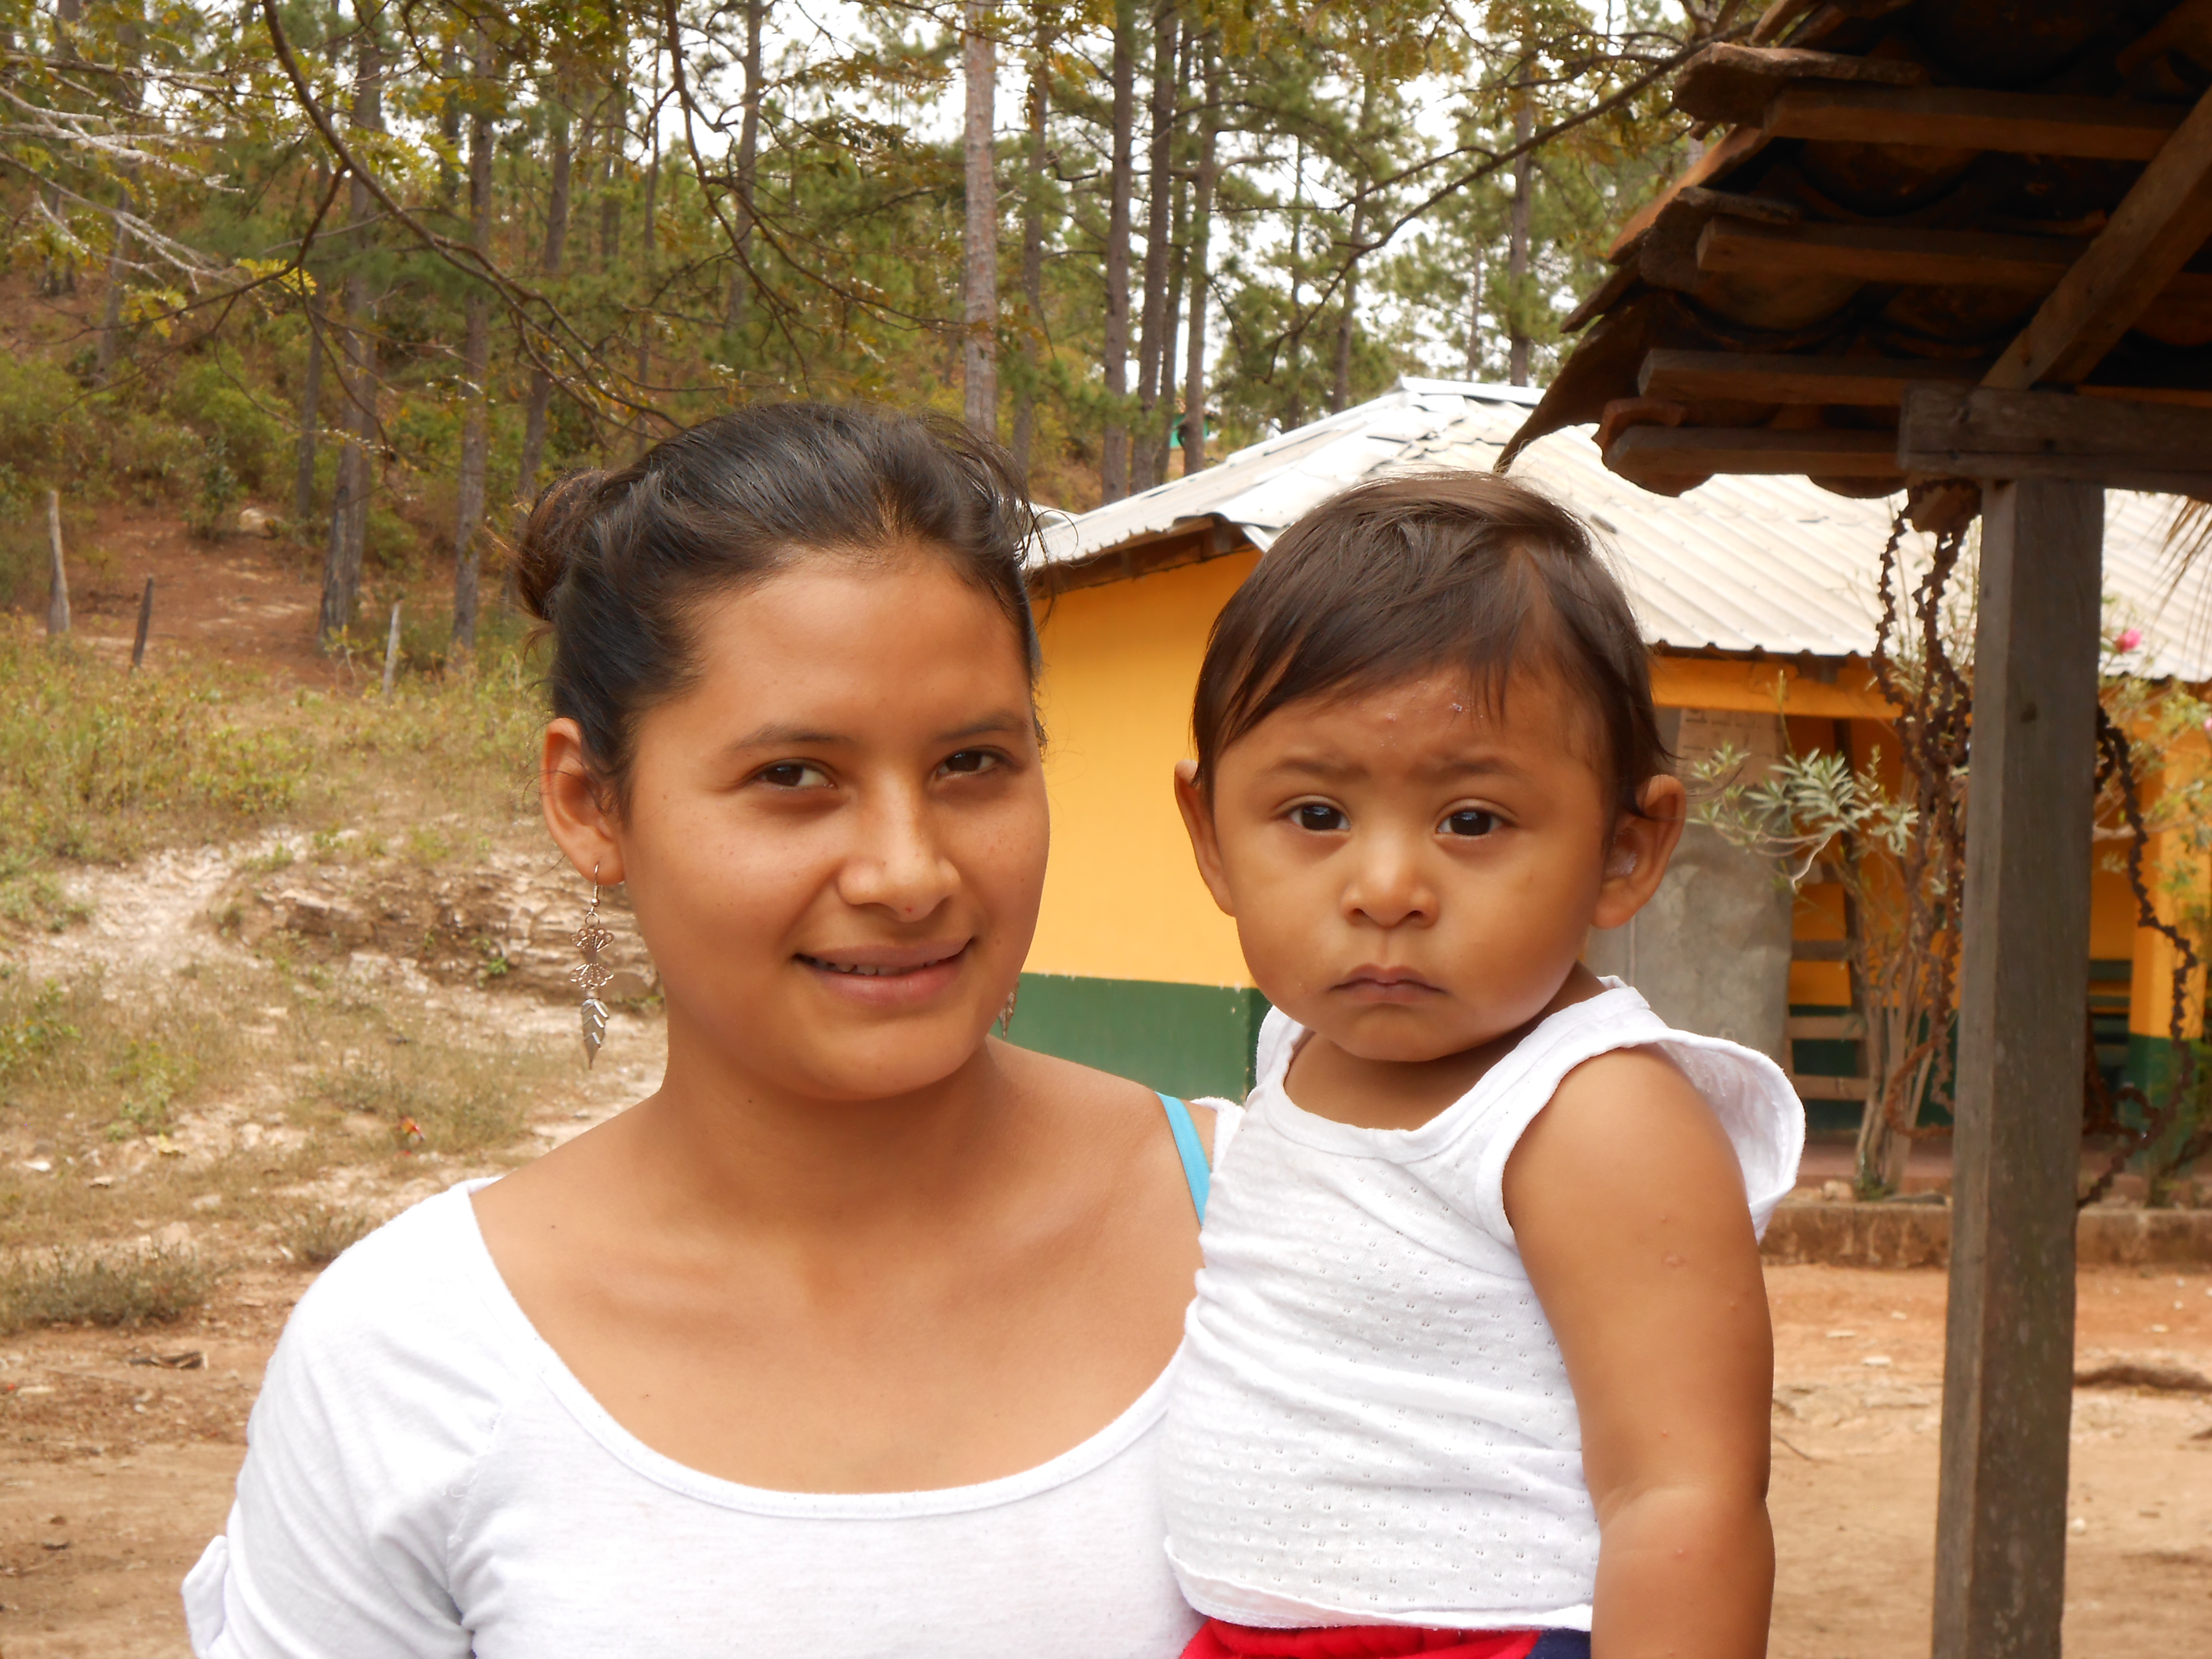 Mother and child from Plan de Rancho, a community of Curarén